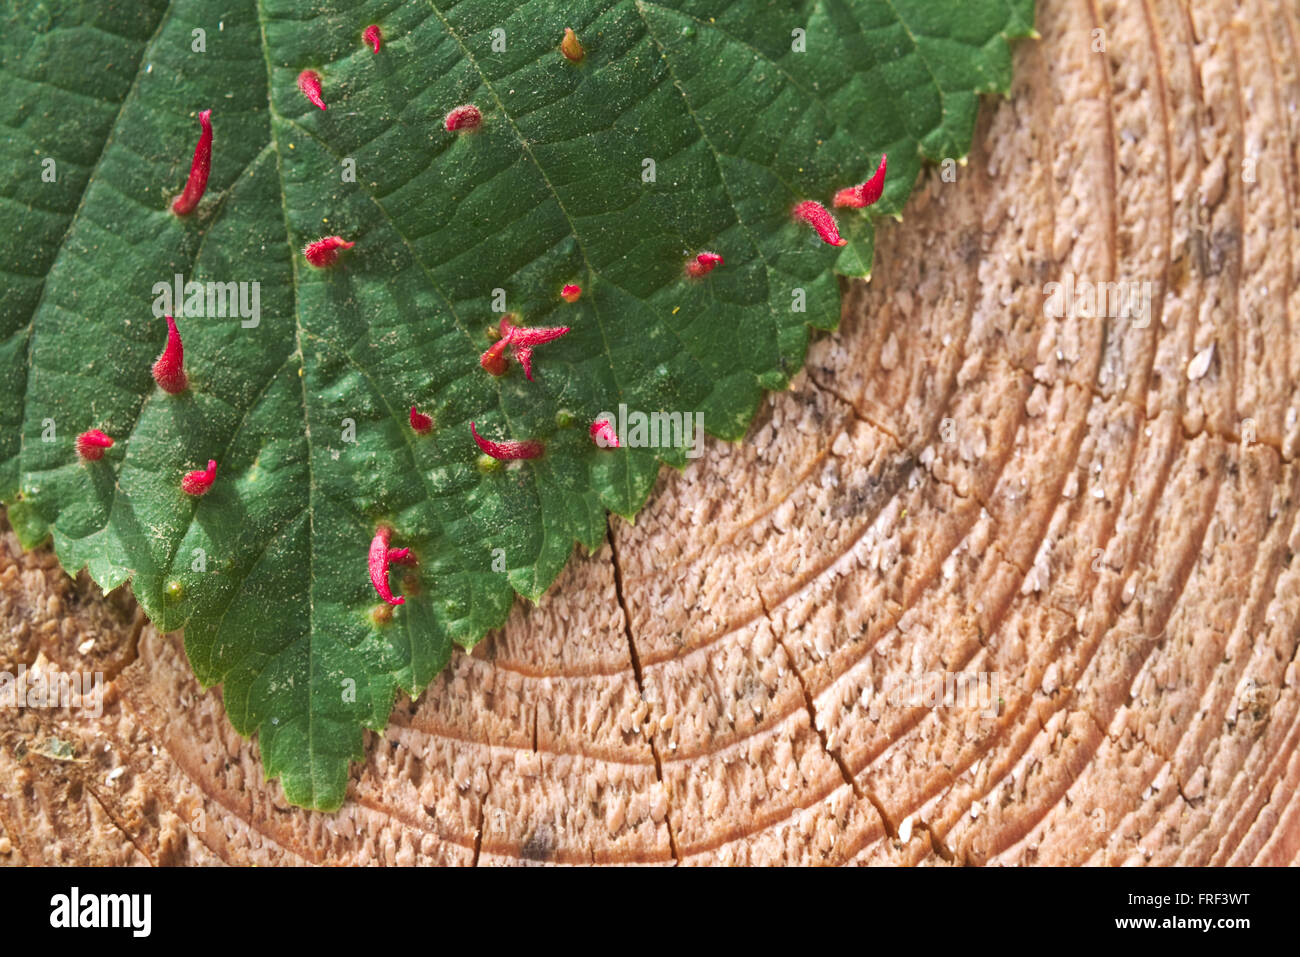 A lime tree leaf with nail galls, formed by the mite Eriophyes tiliae, seen from above. Stock Photo